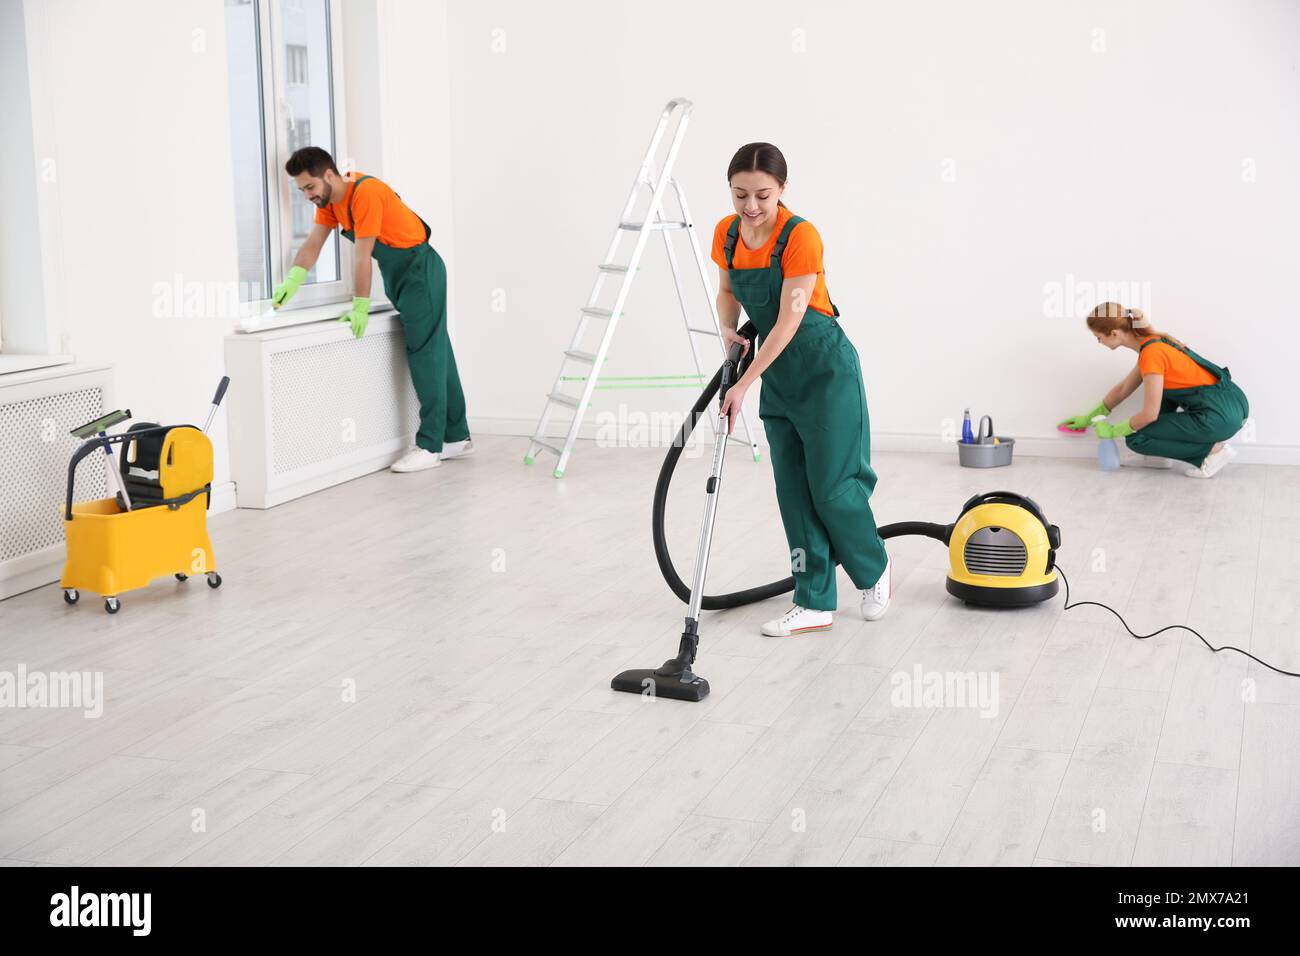 Team of professional janitors in uniforms cleaning room Stock Photo